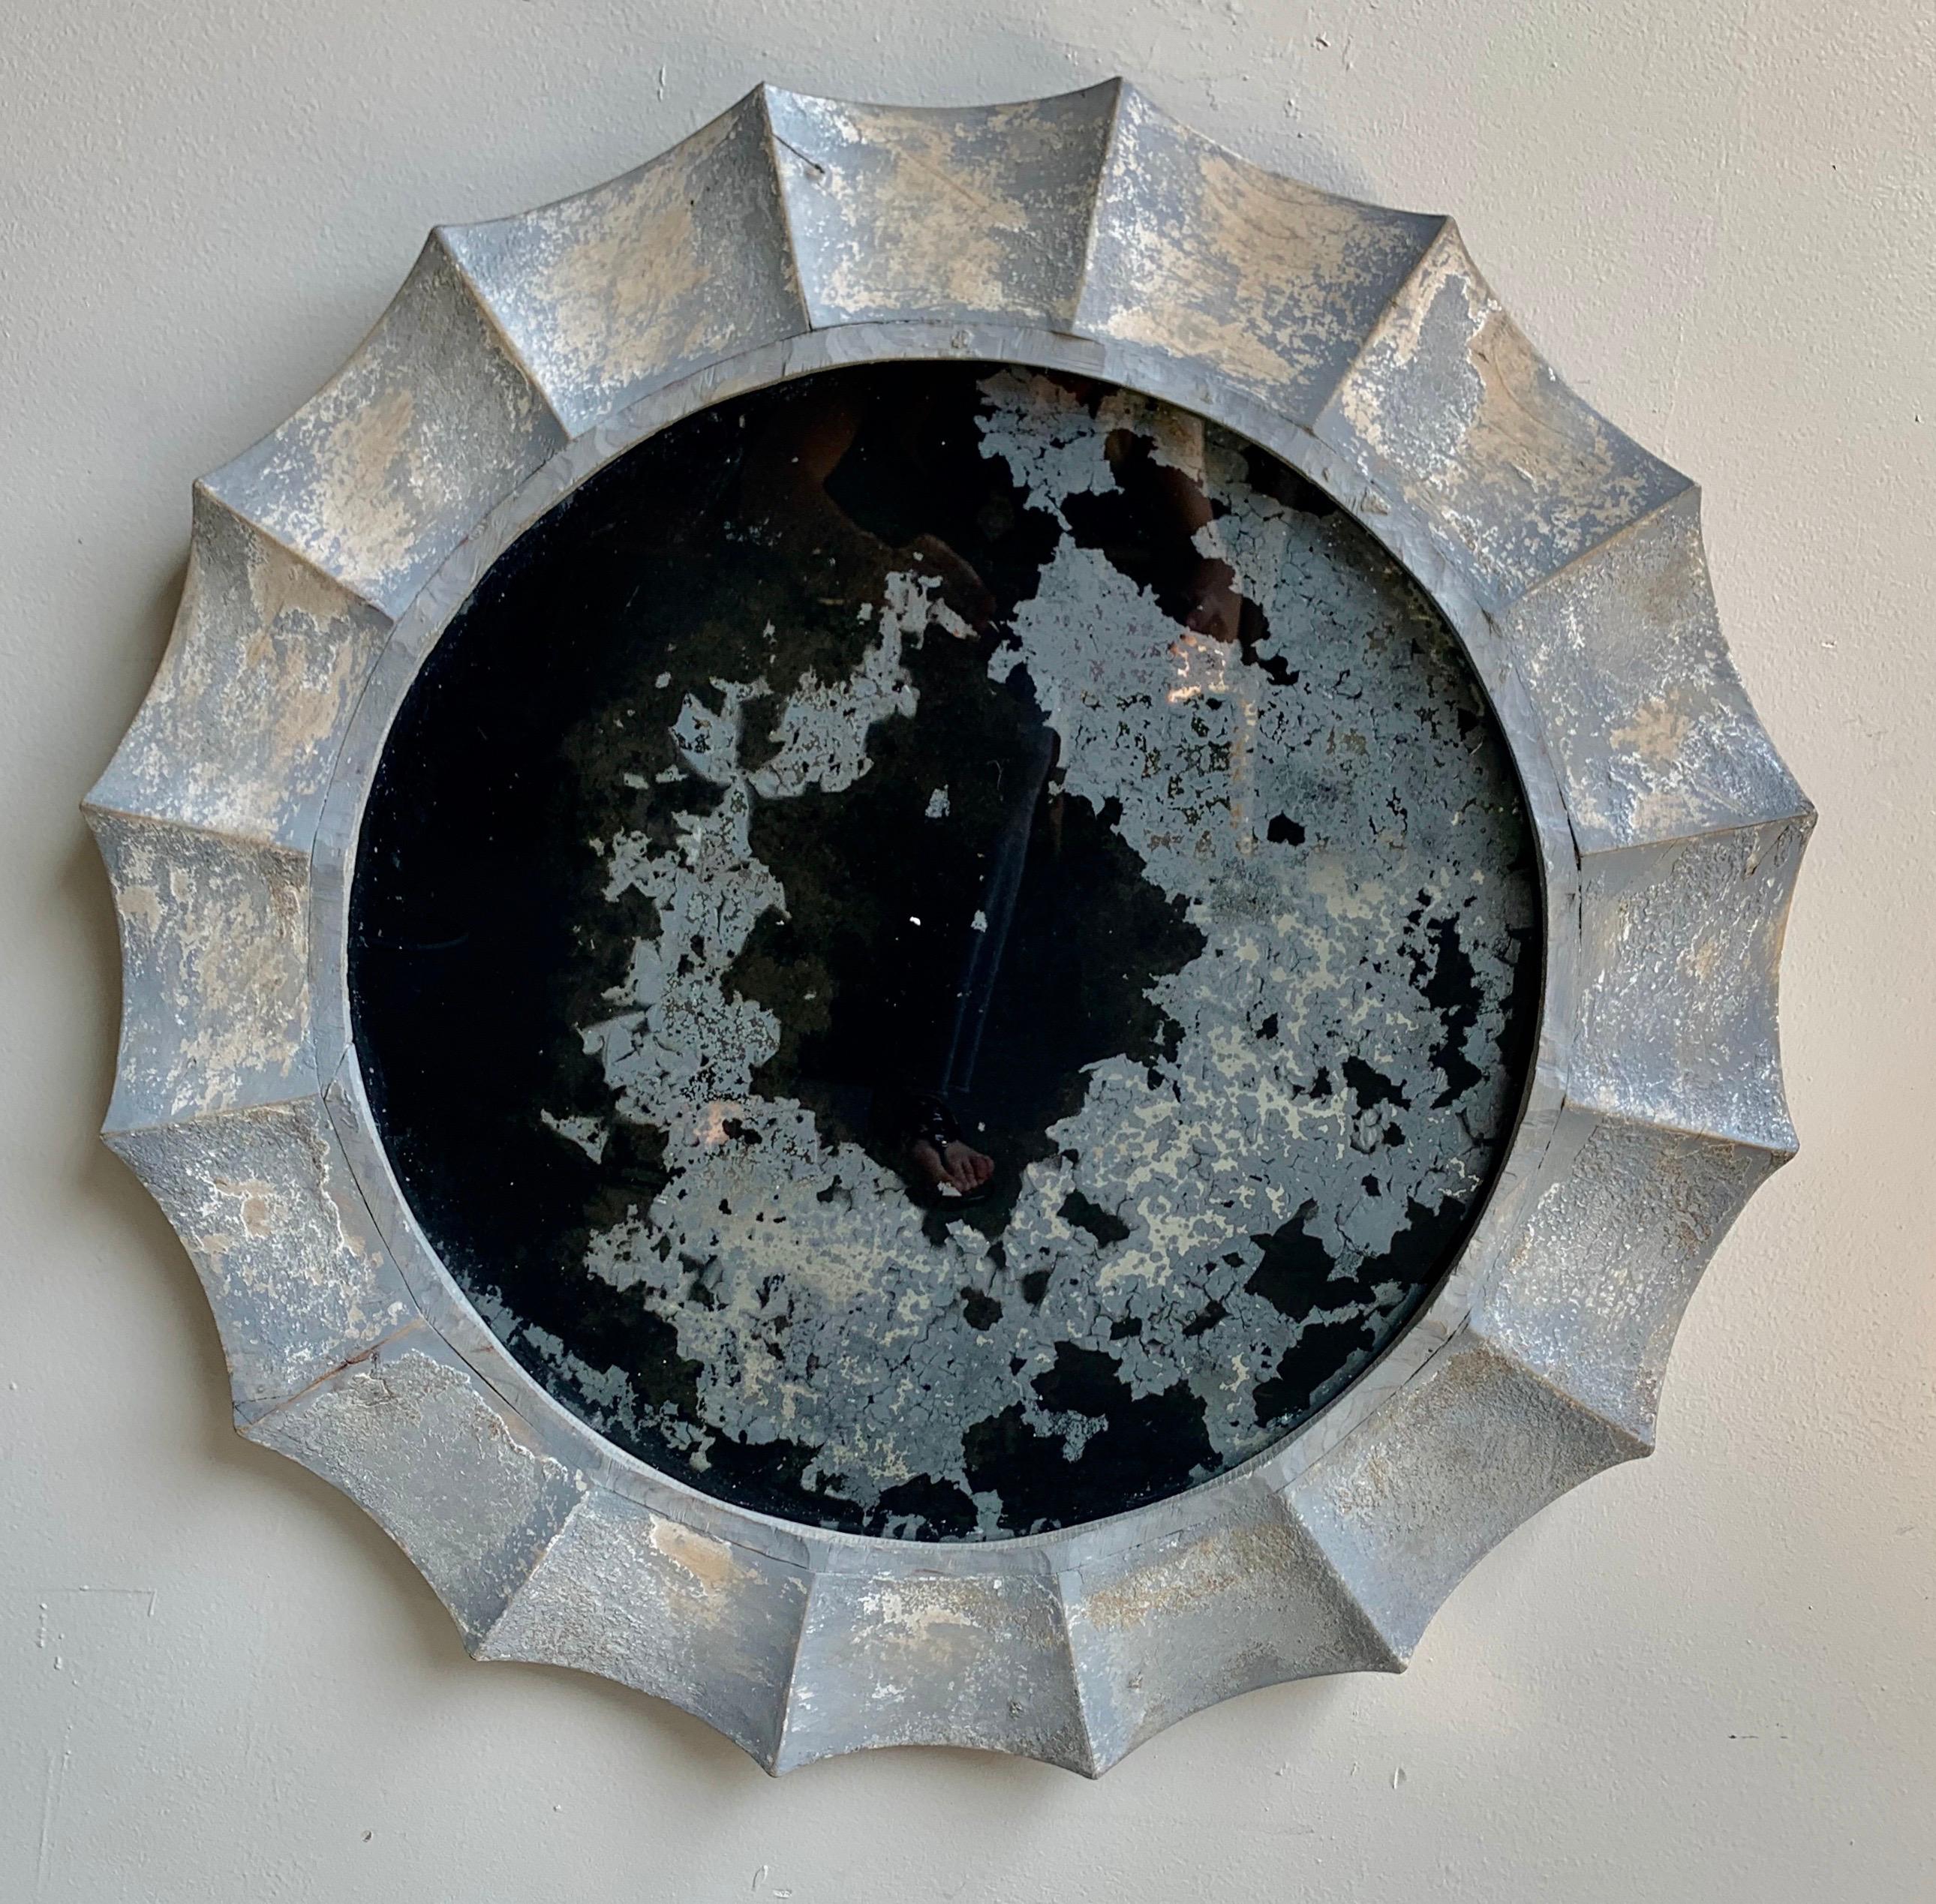 Italian painted sunburst style mirror with a distressed painted finish in soft shades of blue and cream. The mirror has a great scalloped edge and appears to have a modified sunburst mirror shape. The glass is completely antiqued and cannot be used